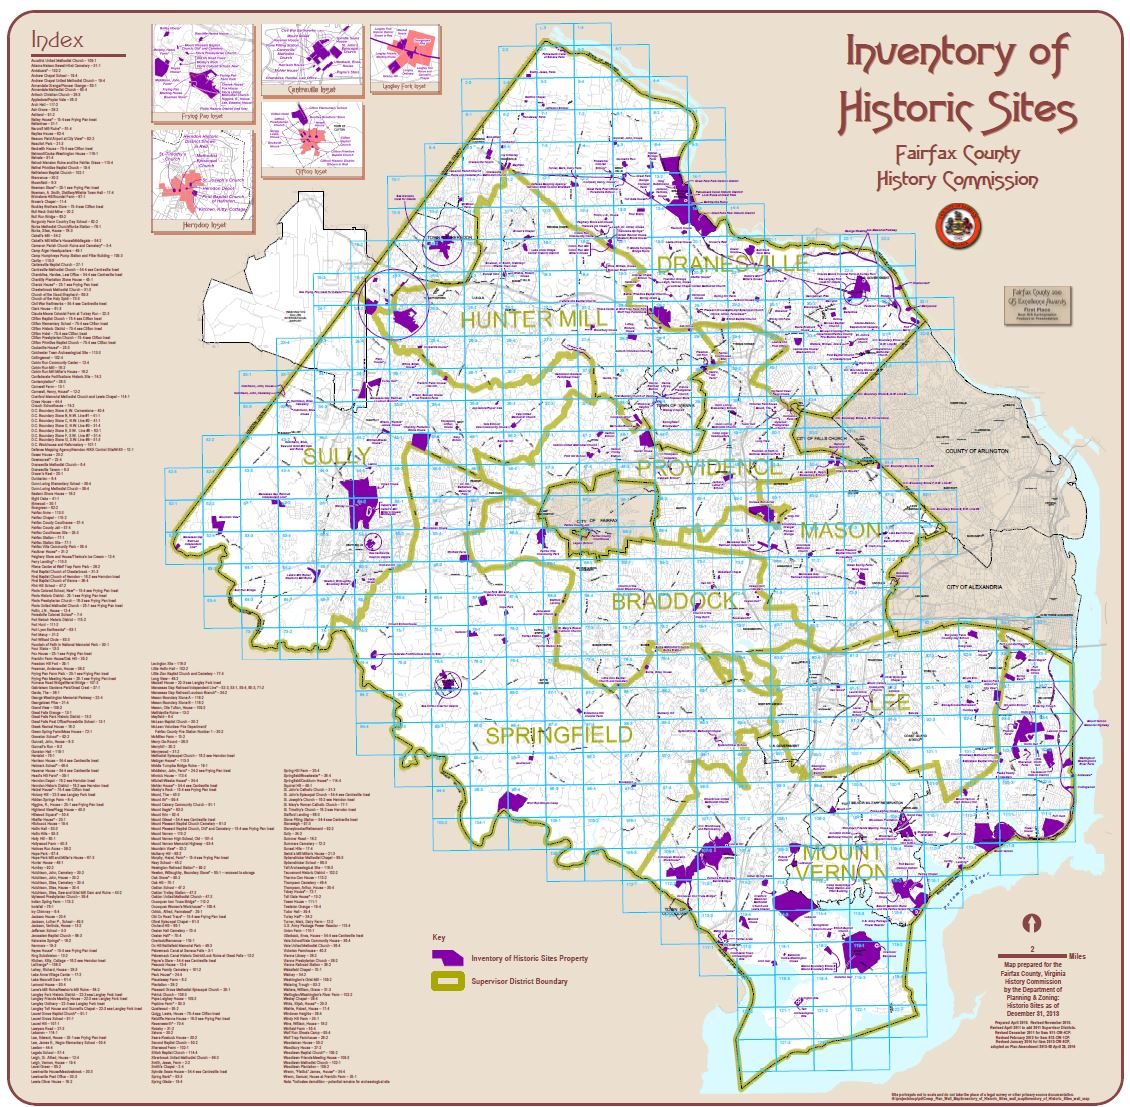 Inventory of Historic Sites